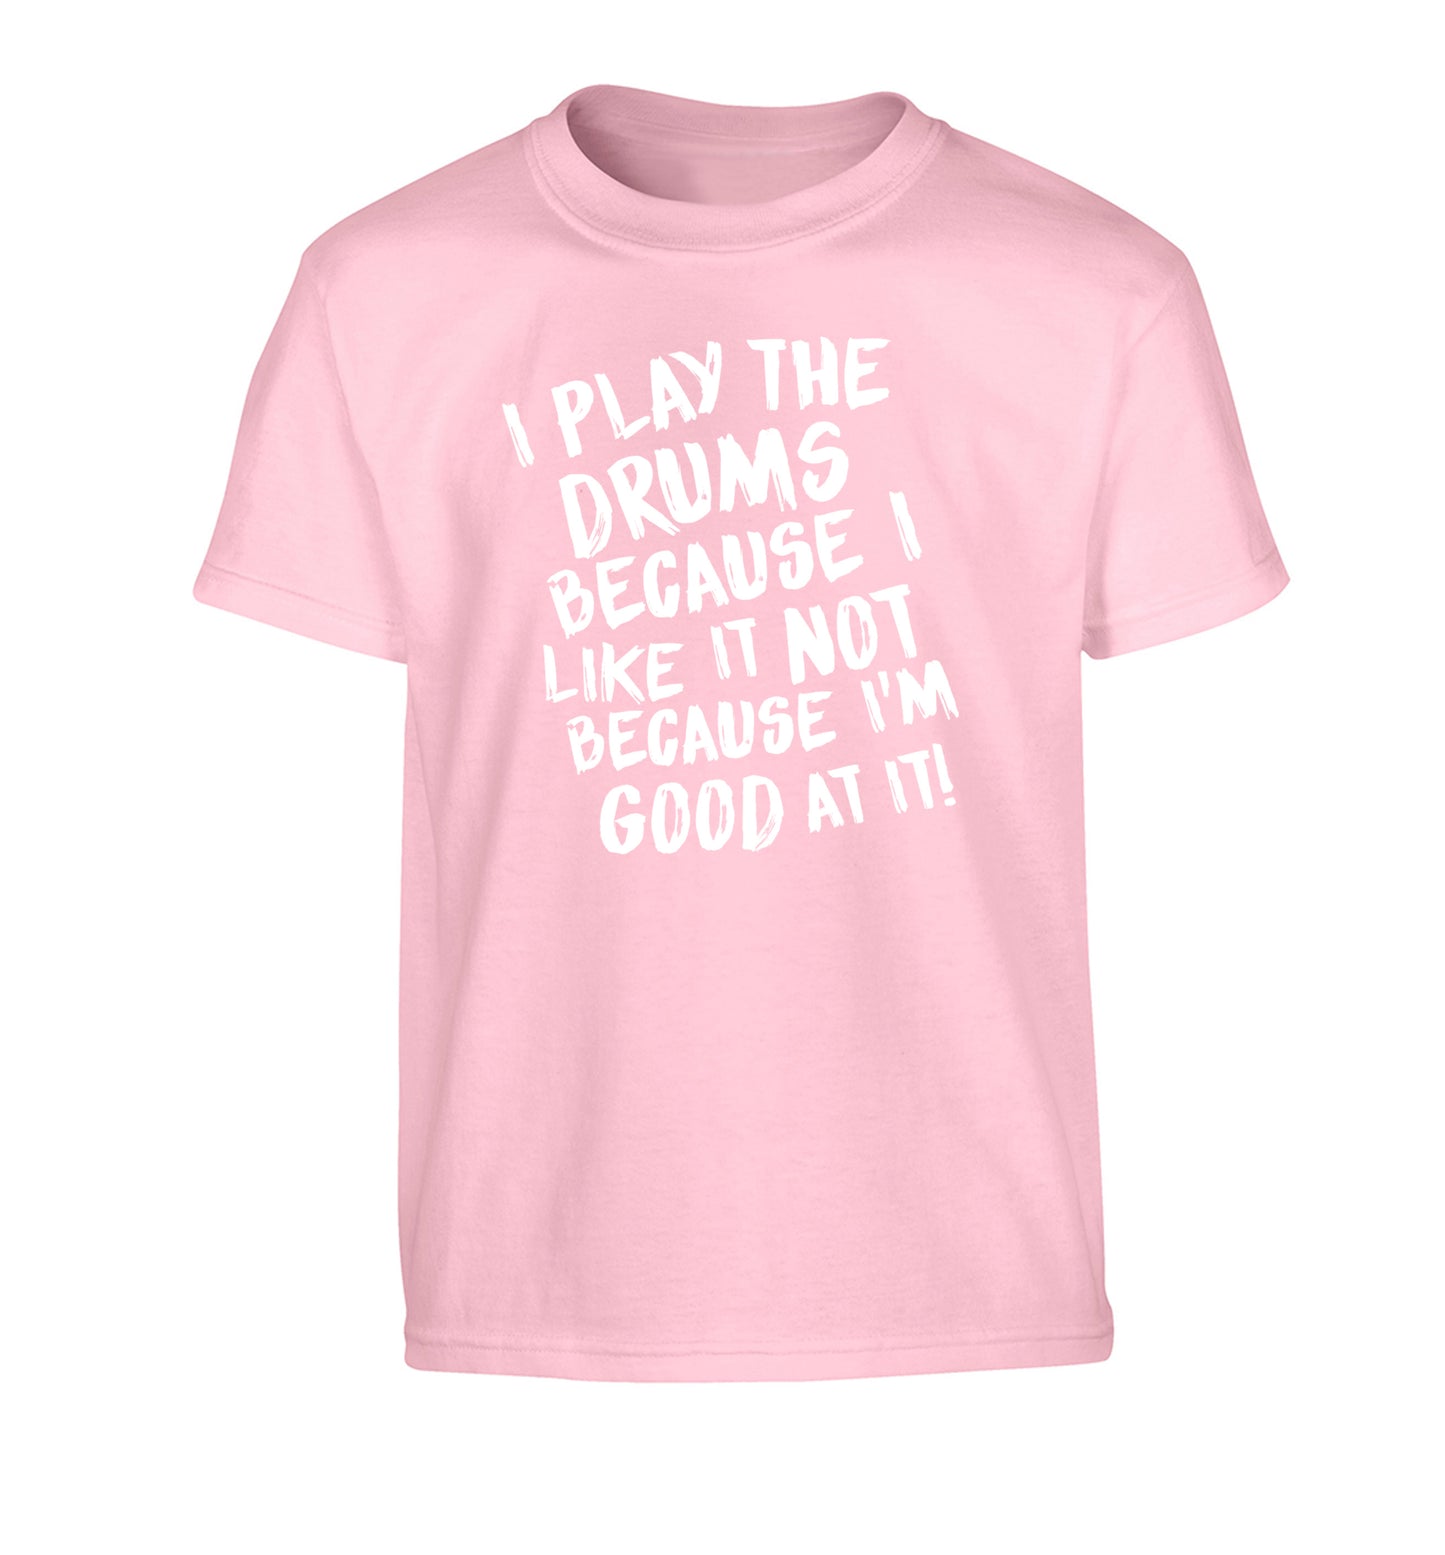 I play the drums because I like it not because I'm good at it Children's light pink Tshirt 12-14 Years